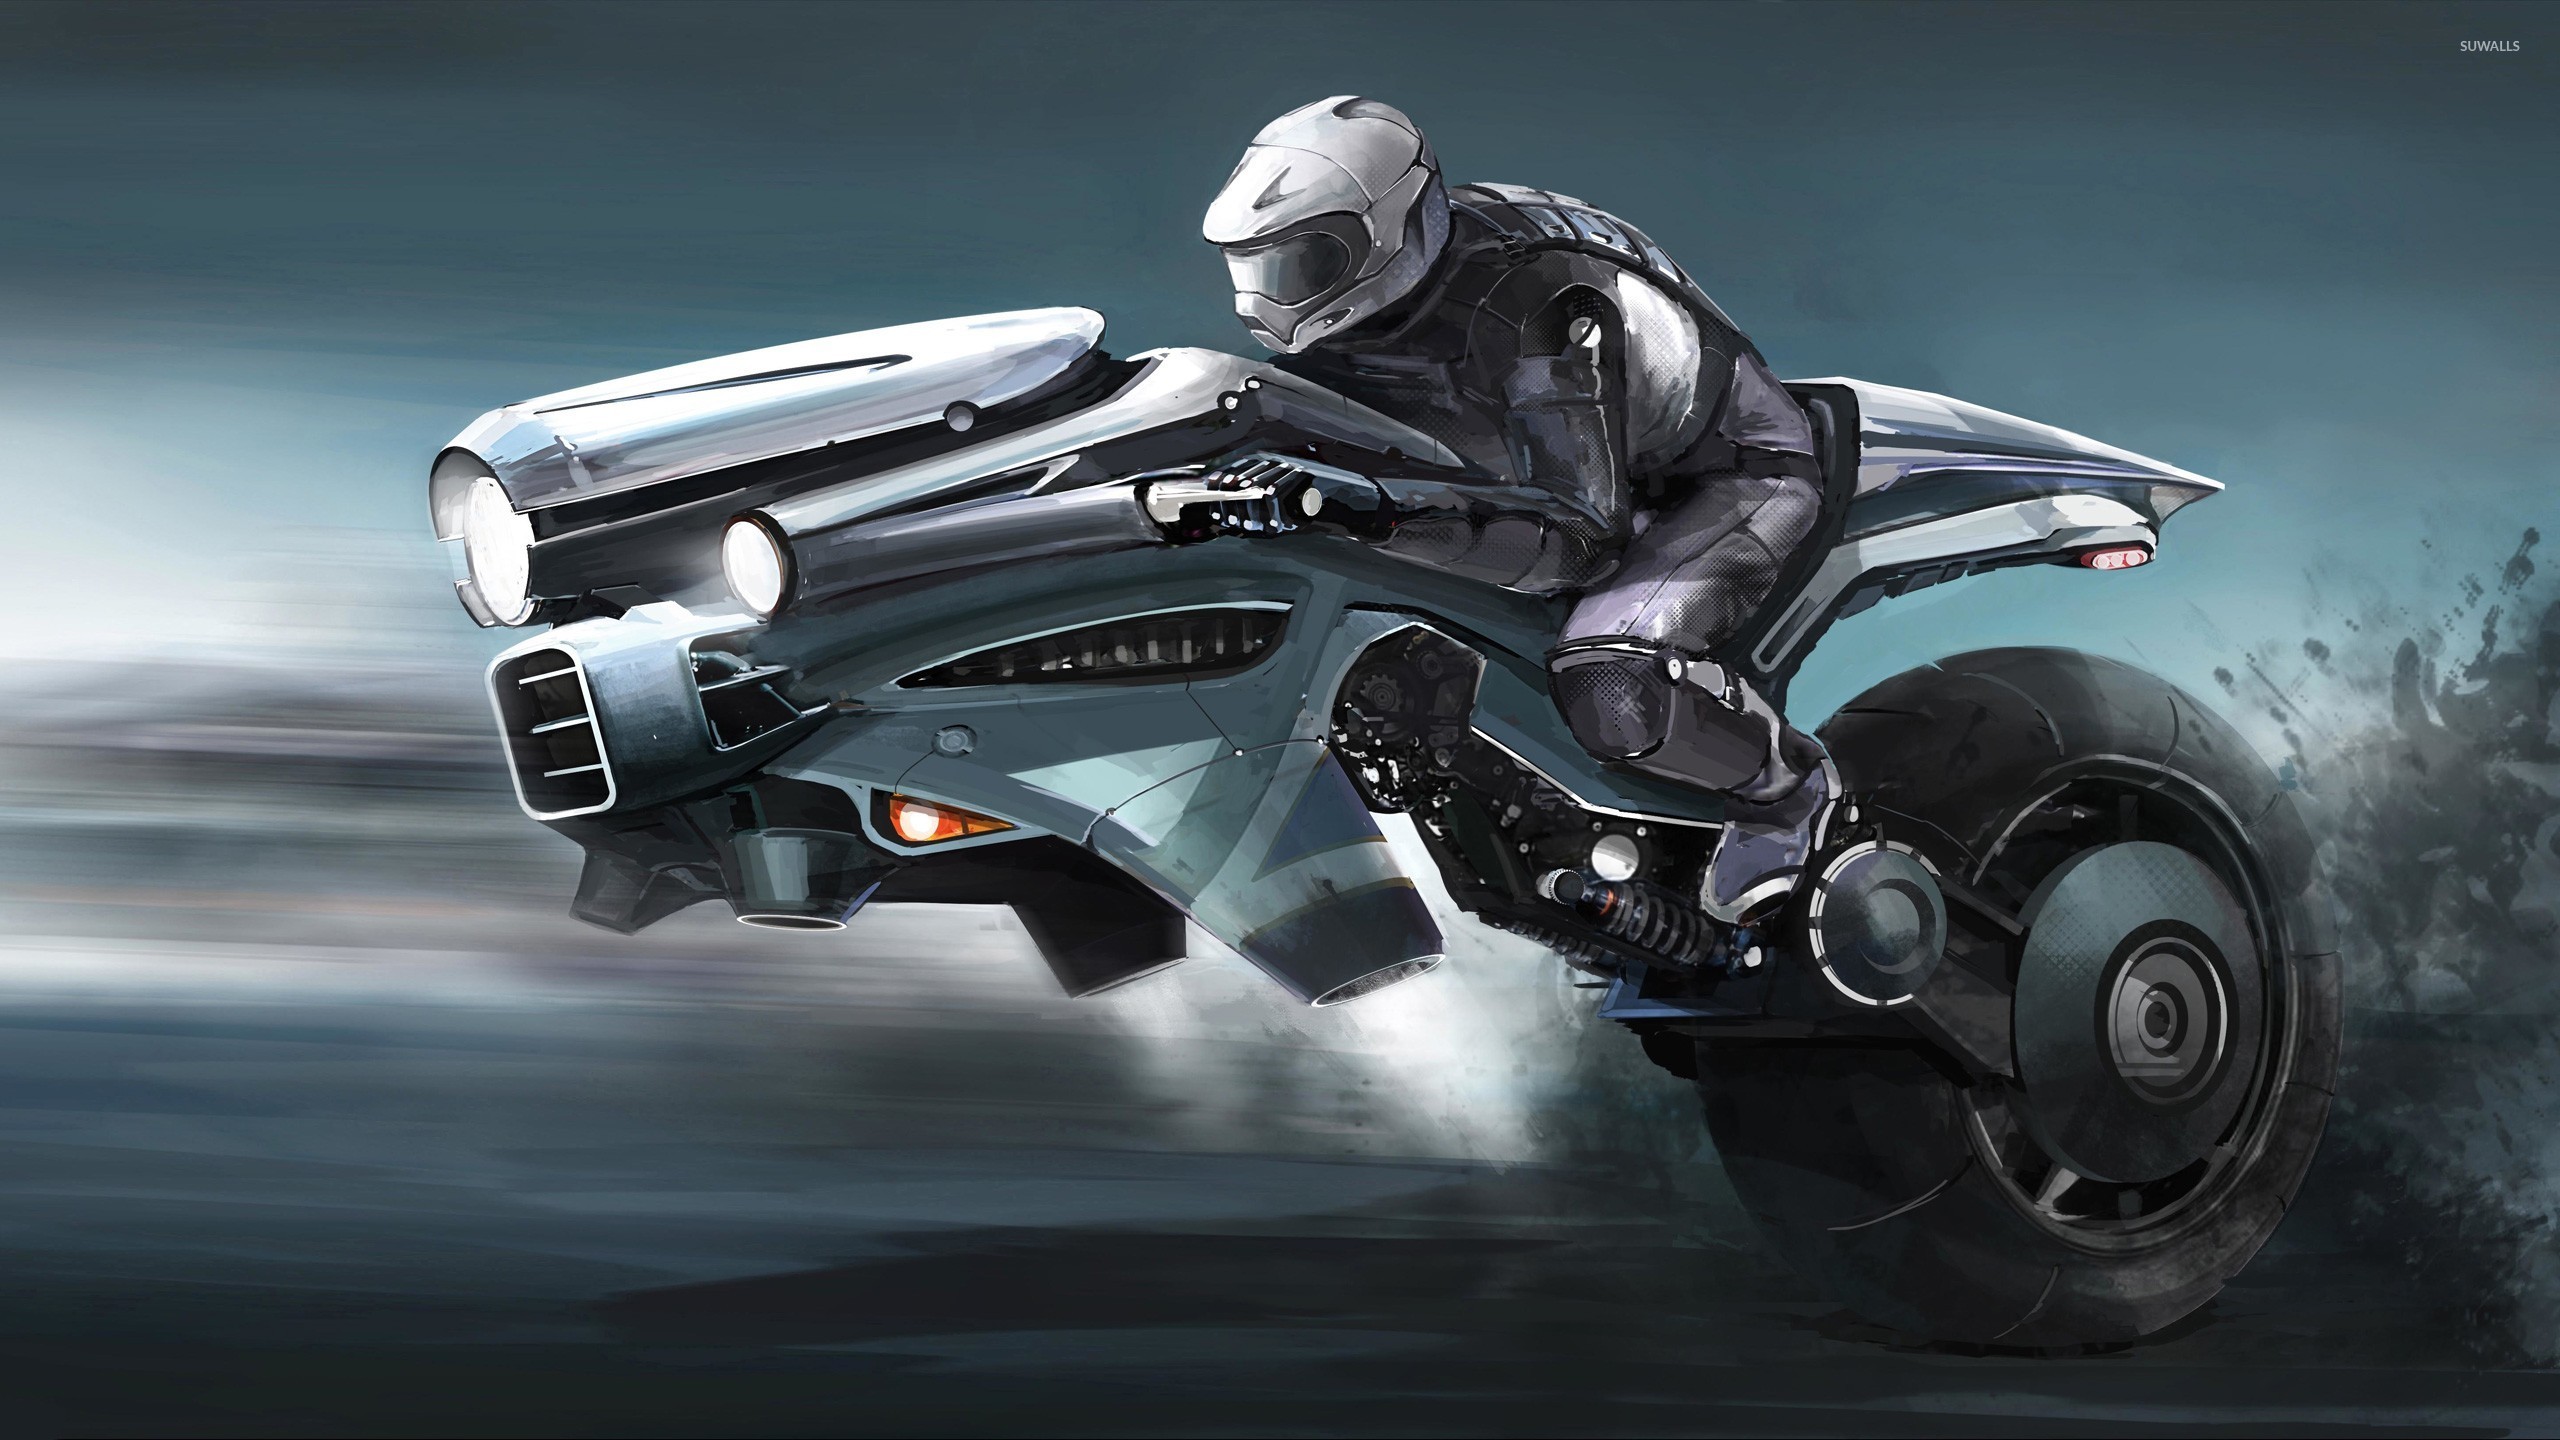 Motorcycle Of The Future Wallpaper Fantasy